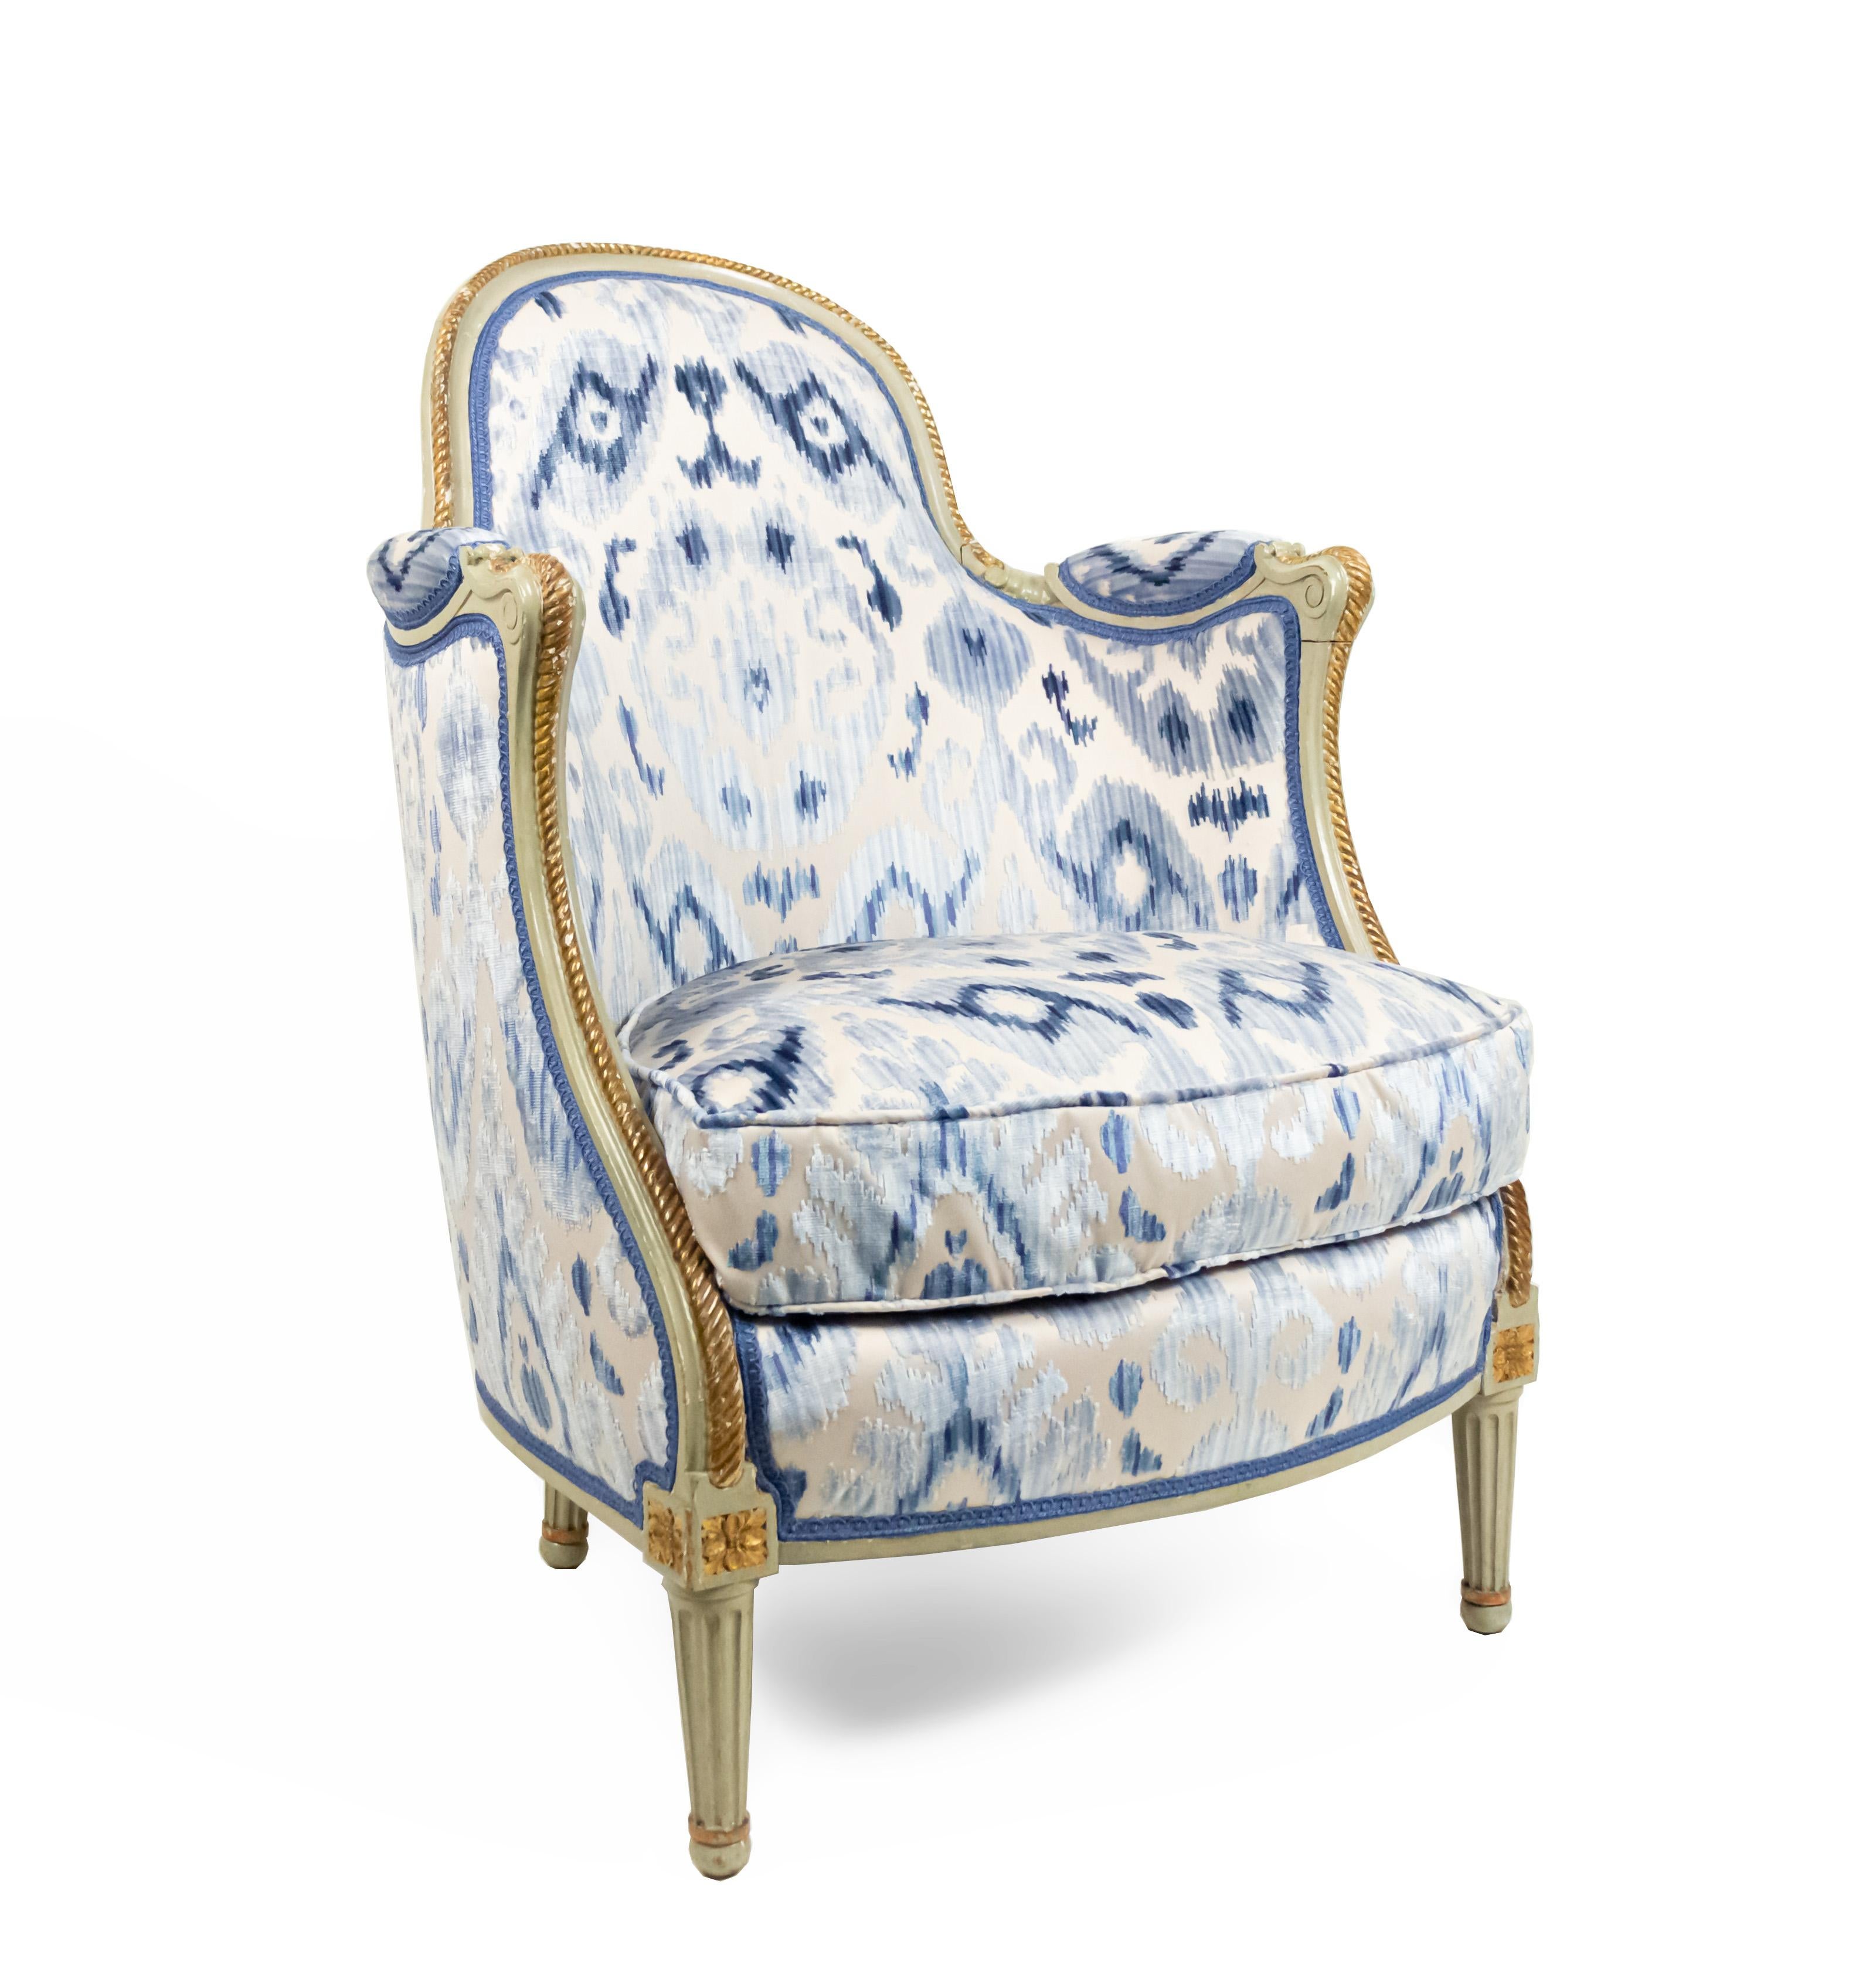 Pair of French Louis XV-style (19th Century) green painted and gilt rope carved trimmed bergere Armchairs with Ikat-style blue cut velvet and beige satin upholstery. (PRICED AS Pair)
